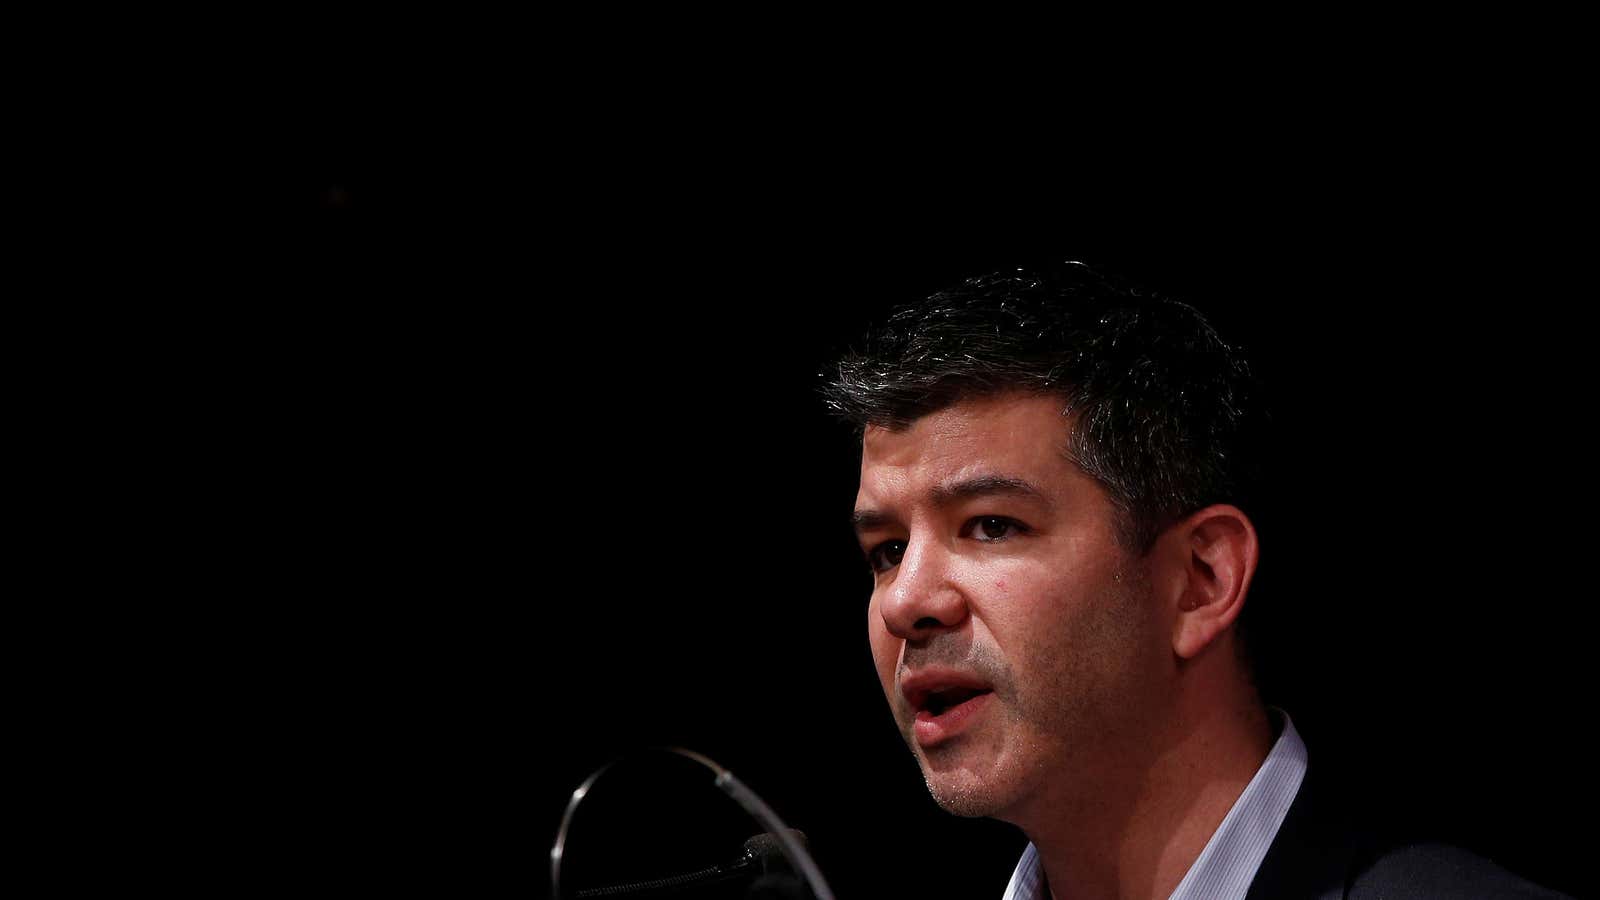 Uber CEO Travis Kalanick is having a rough 2017.